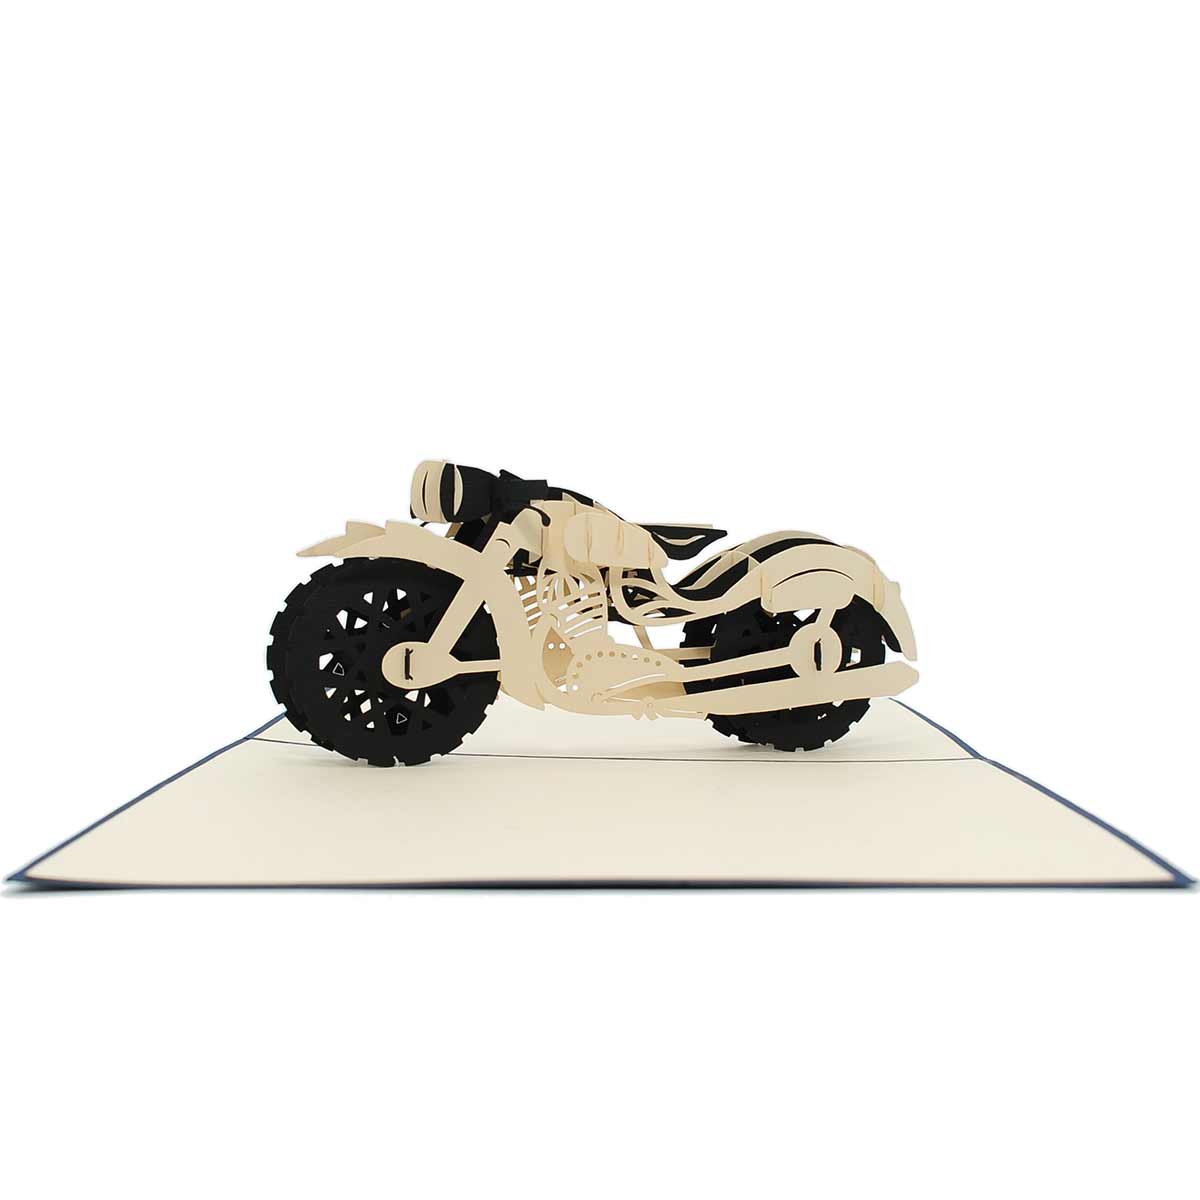 Motorcycles Handmade Pop Up 3D Card Paper Greeting Card Birthday With Envelope 